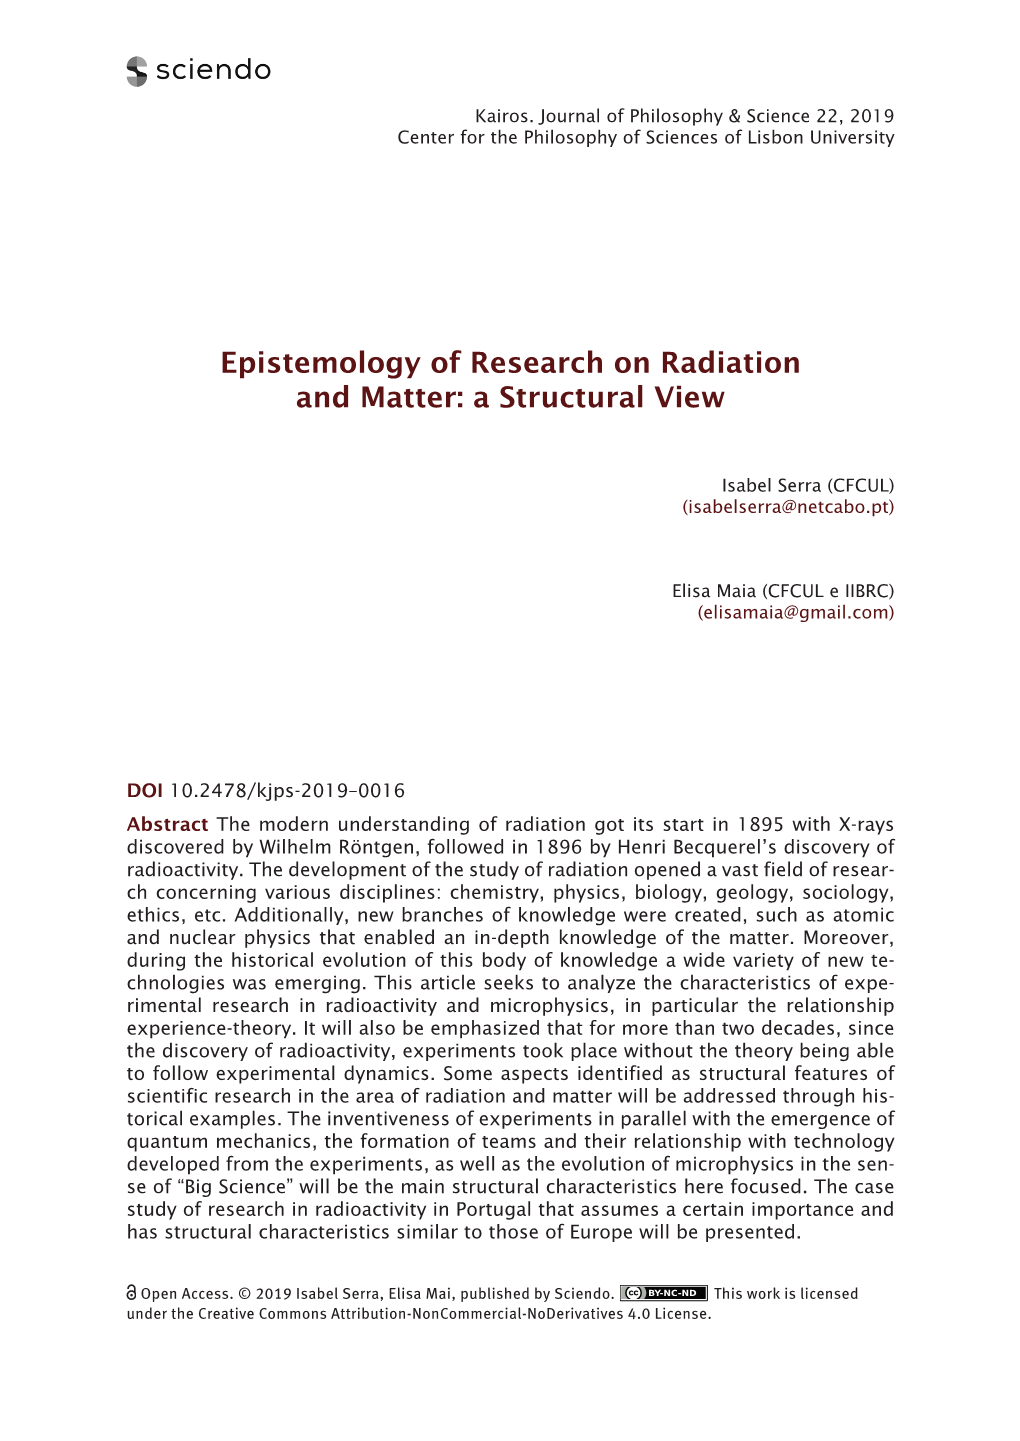 Epistemology of Research on Radiation and Matter: a Structural View